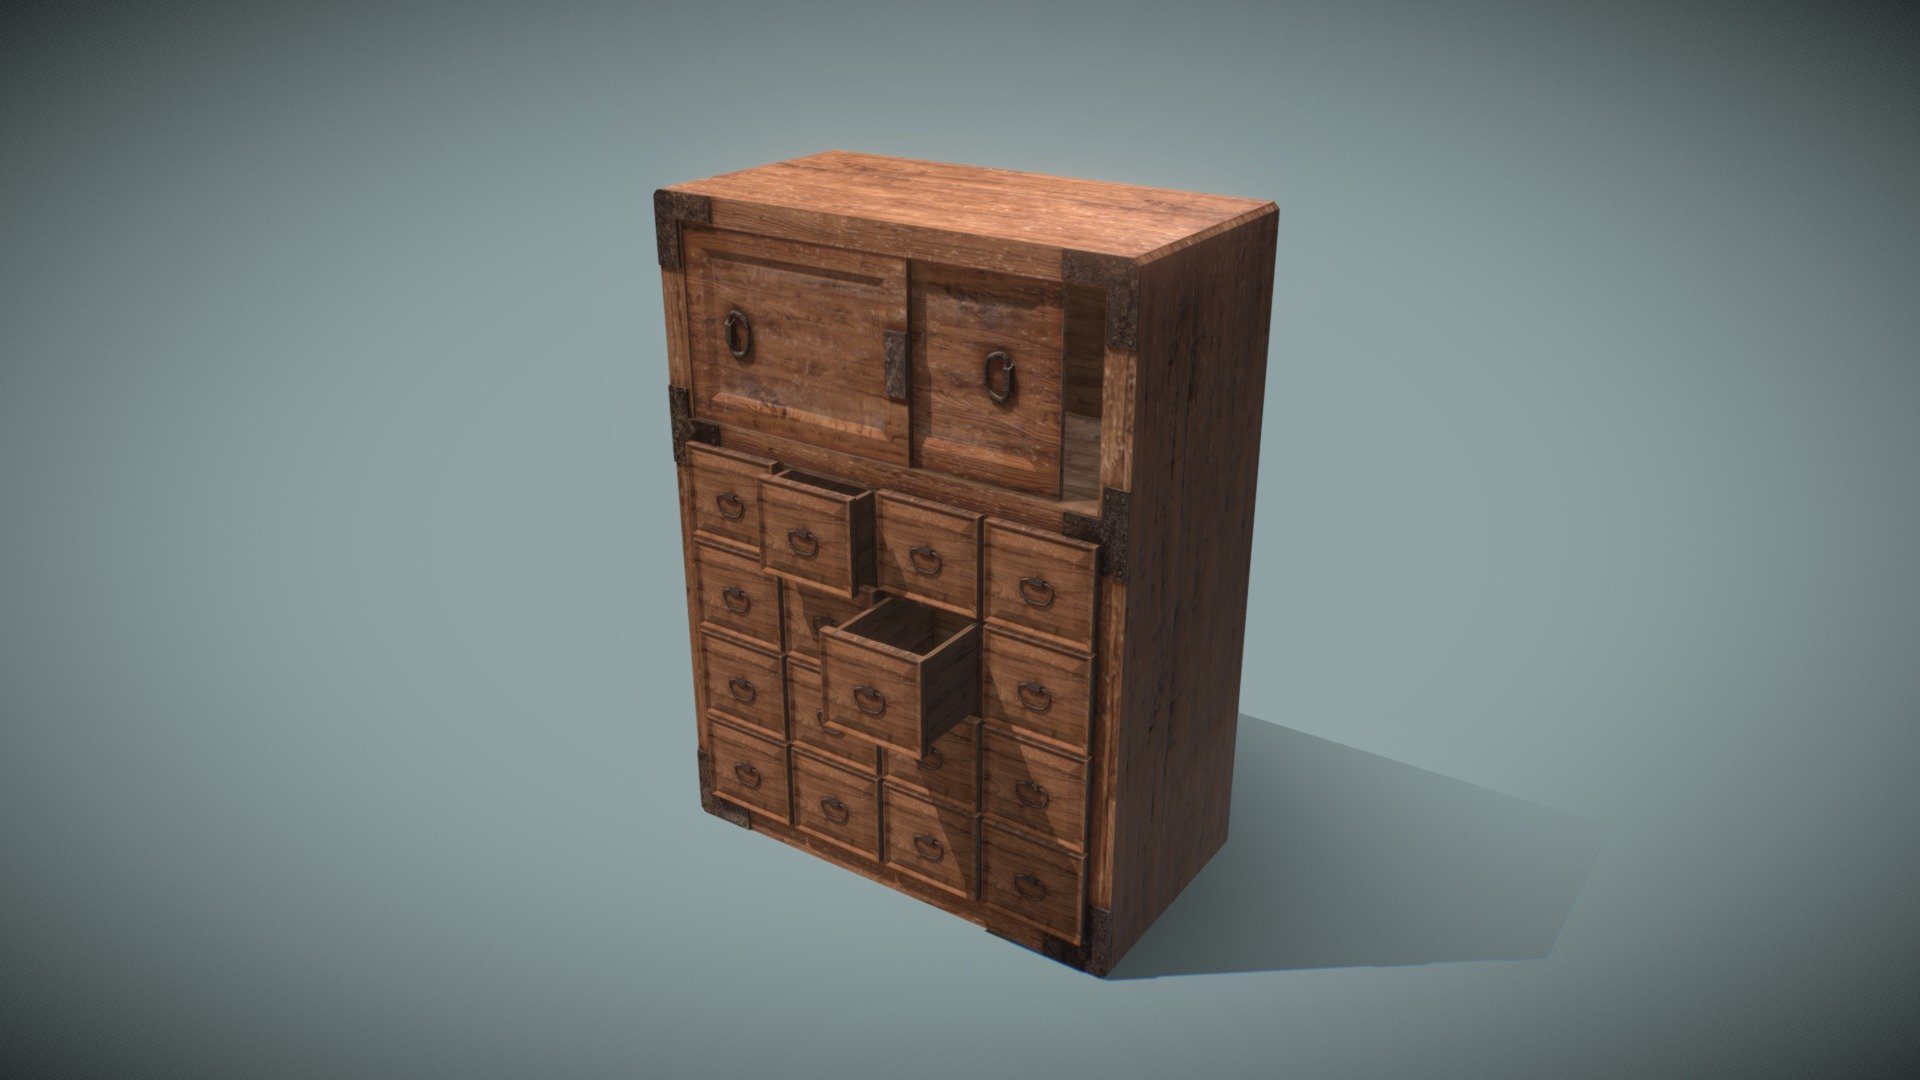 This is Japanese traditional cupboard.

complete texture map.

optimize polygon.

ready for games interior assets 3d model